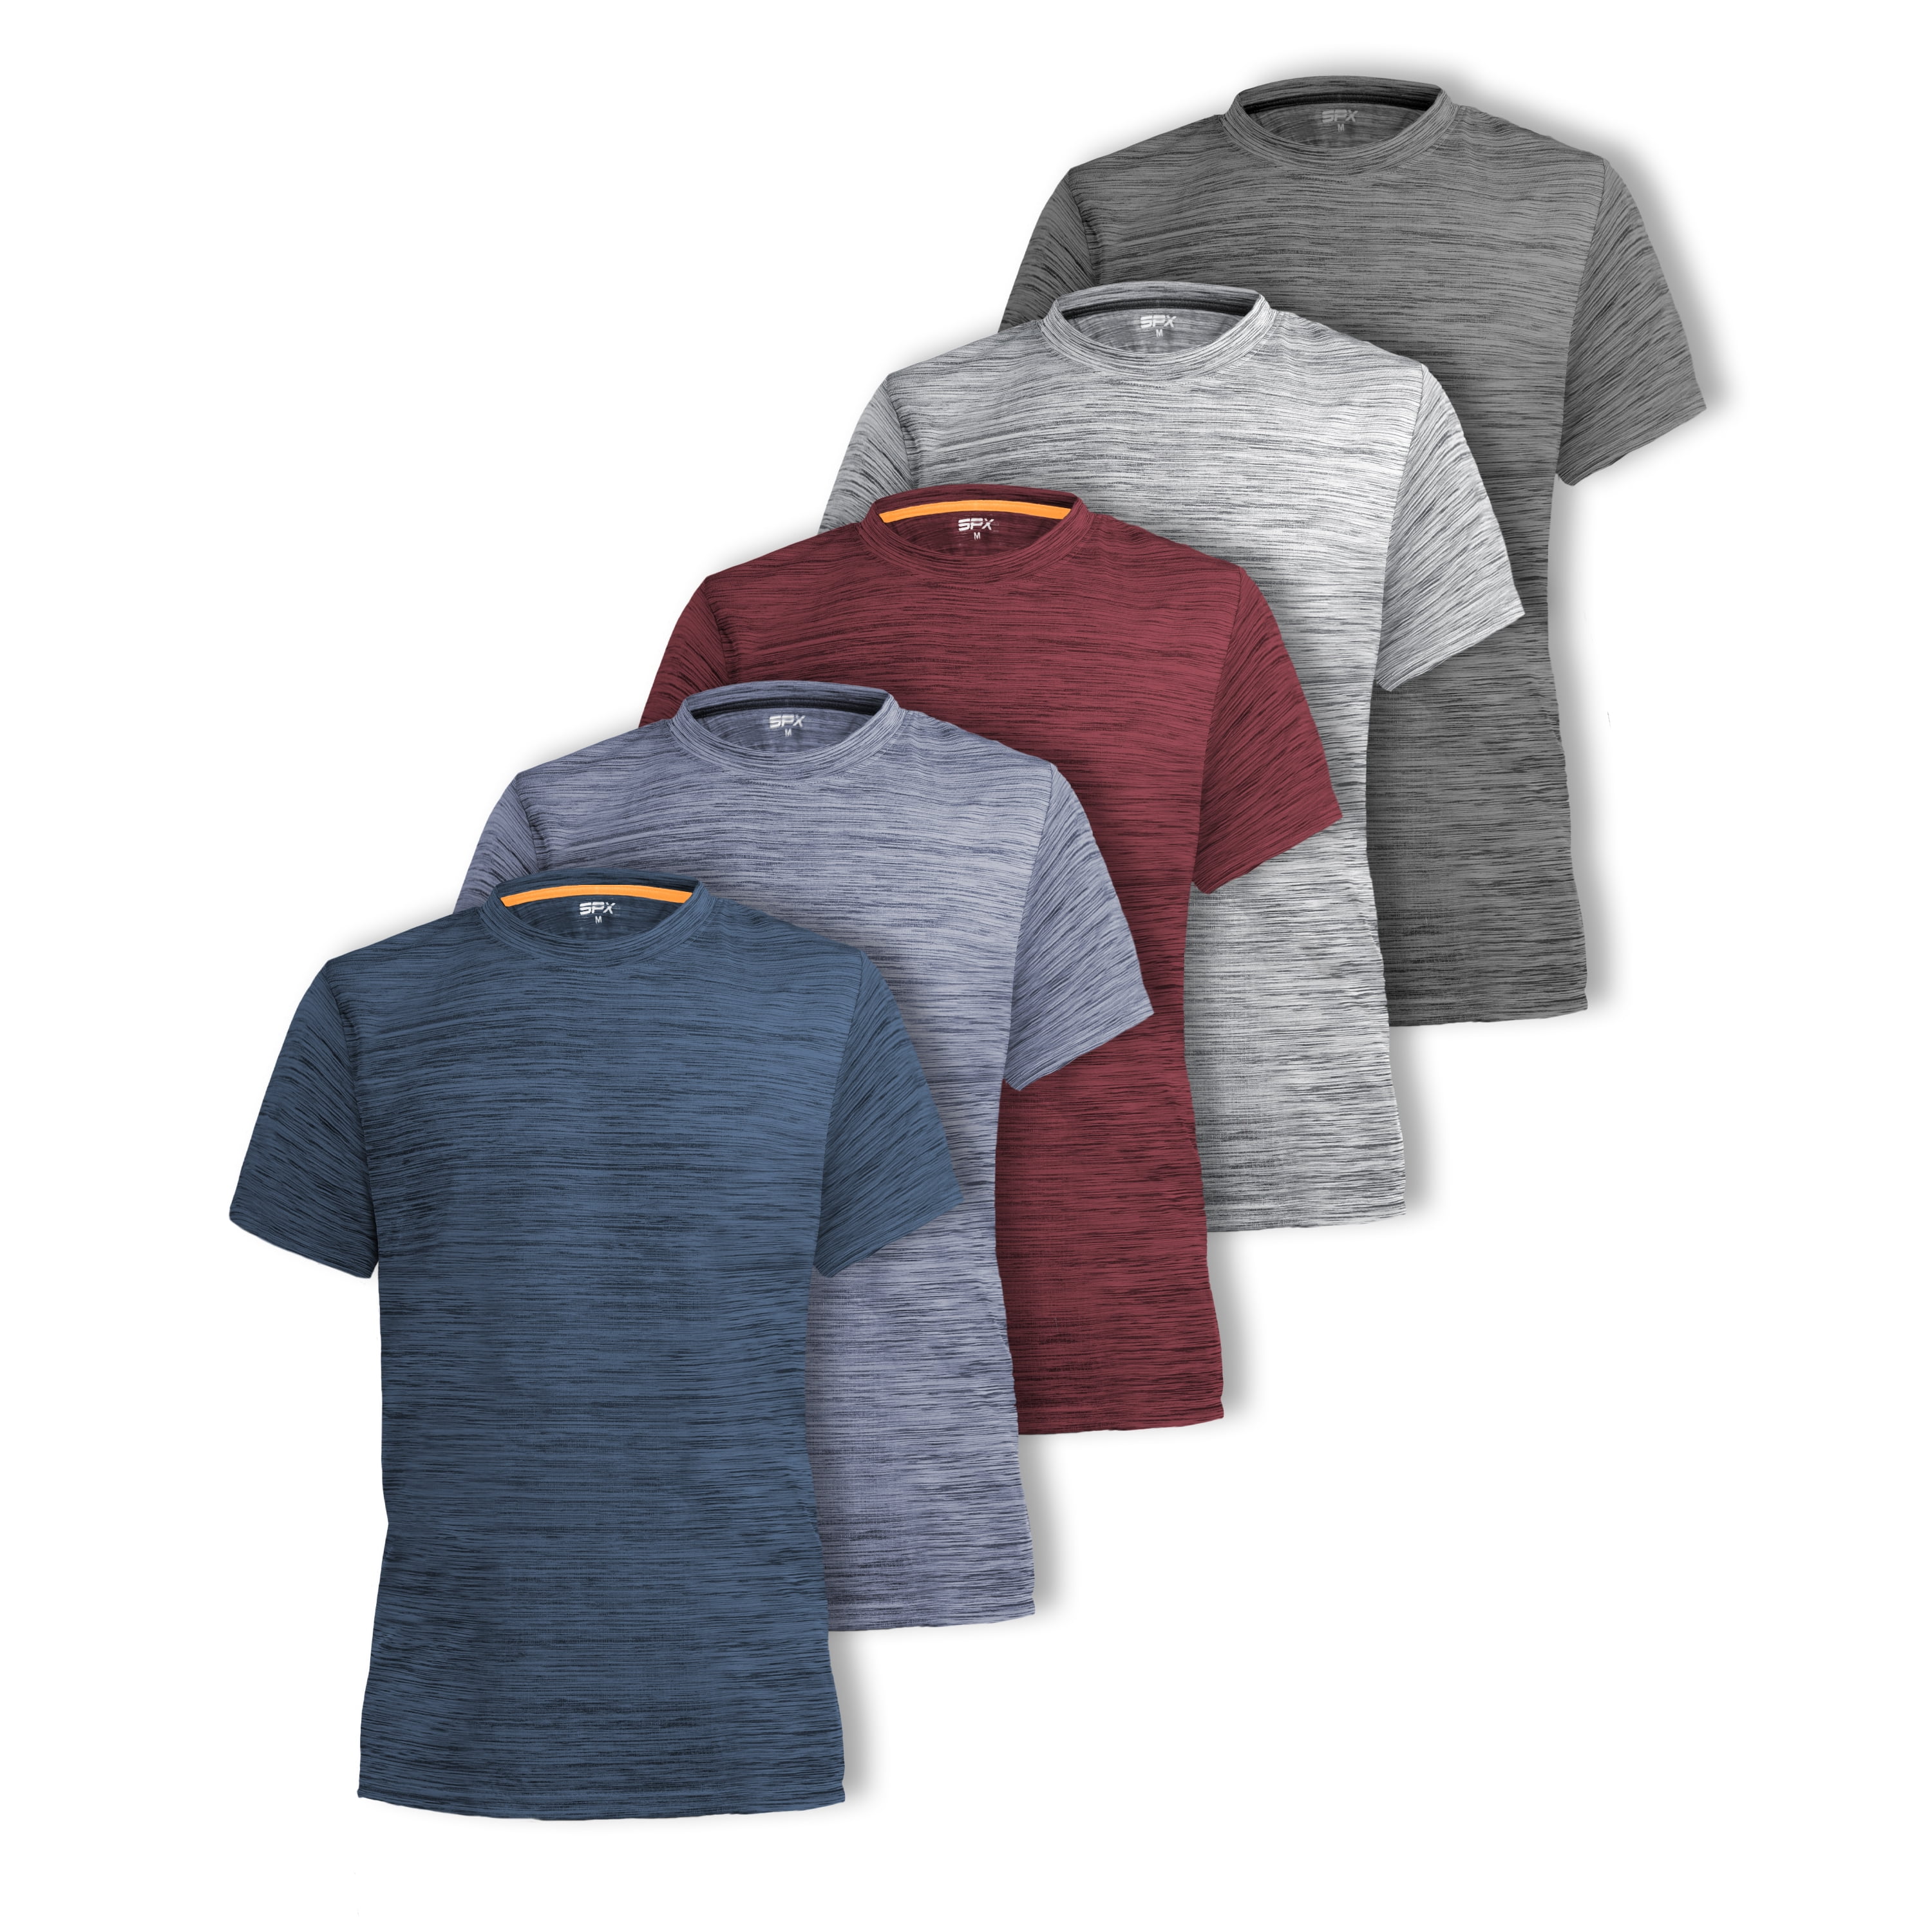 Men's Dry Fit Short Sleeve T-Shirt Crewneck Lightweight Tee Shirts for Men Workout Athletic Casual 